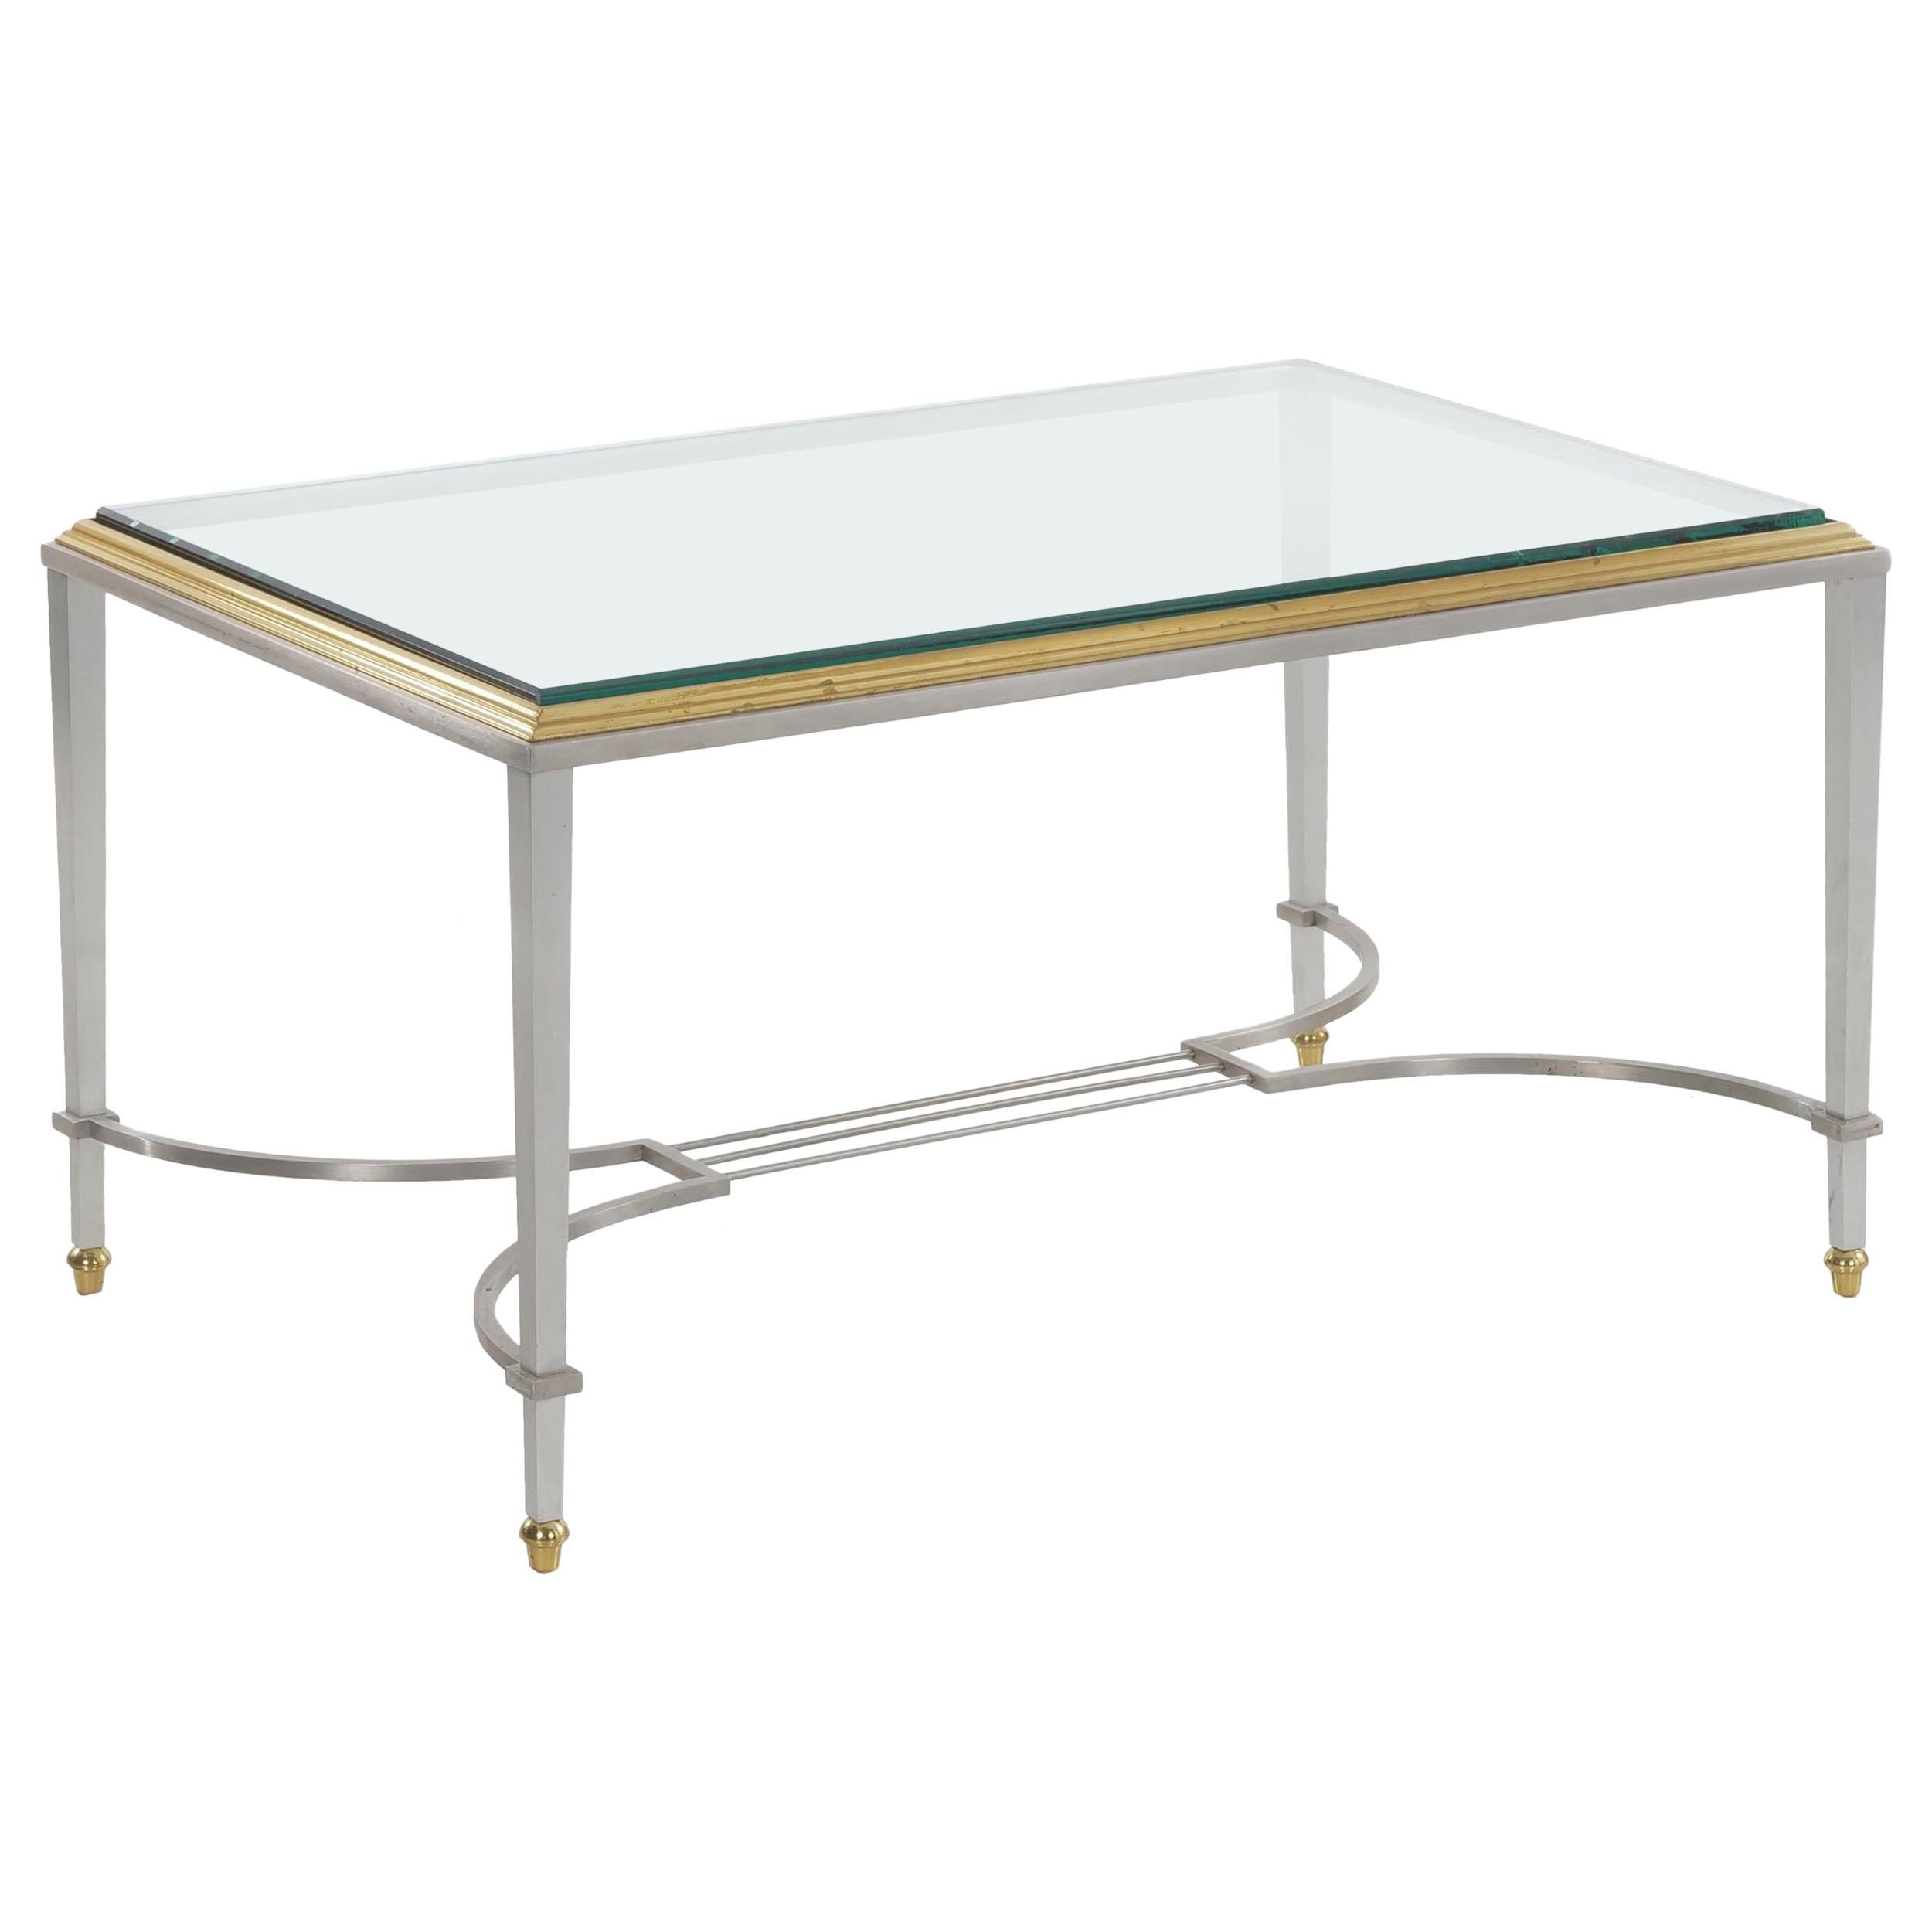 French Steel and Brass Cocktail Coffee Table in manner of Maison Jansen